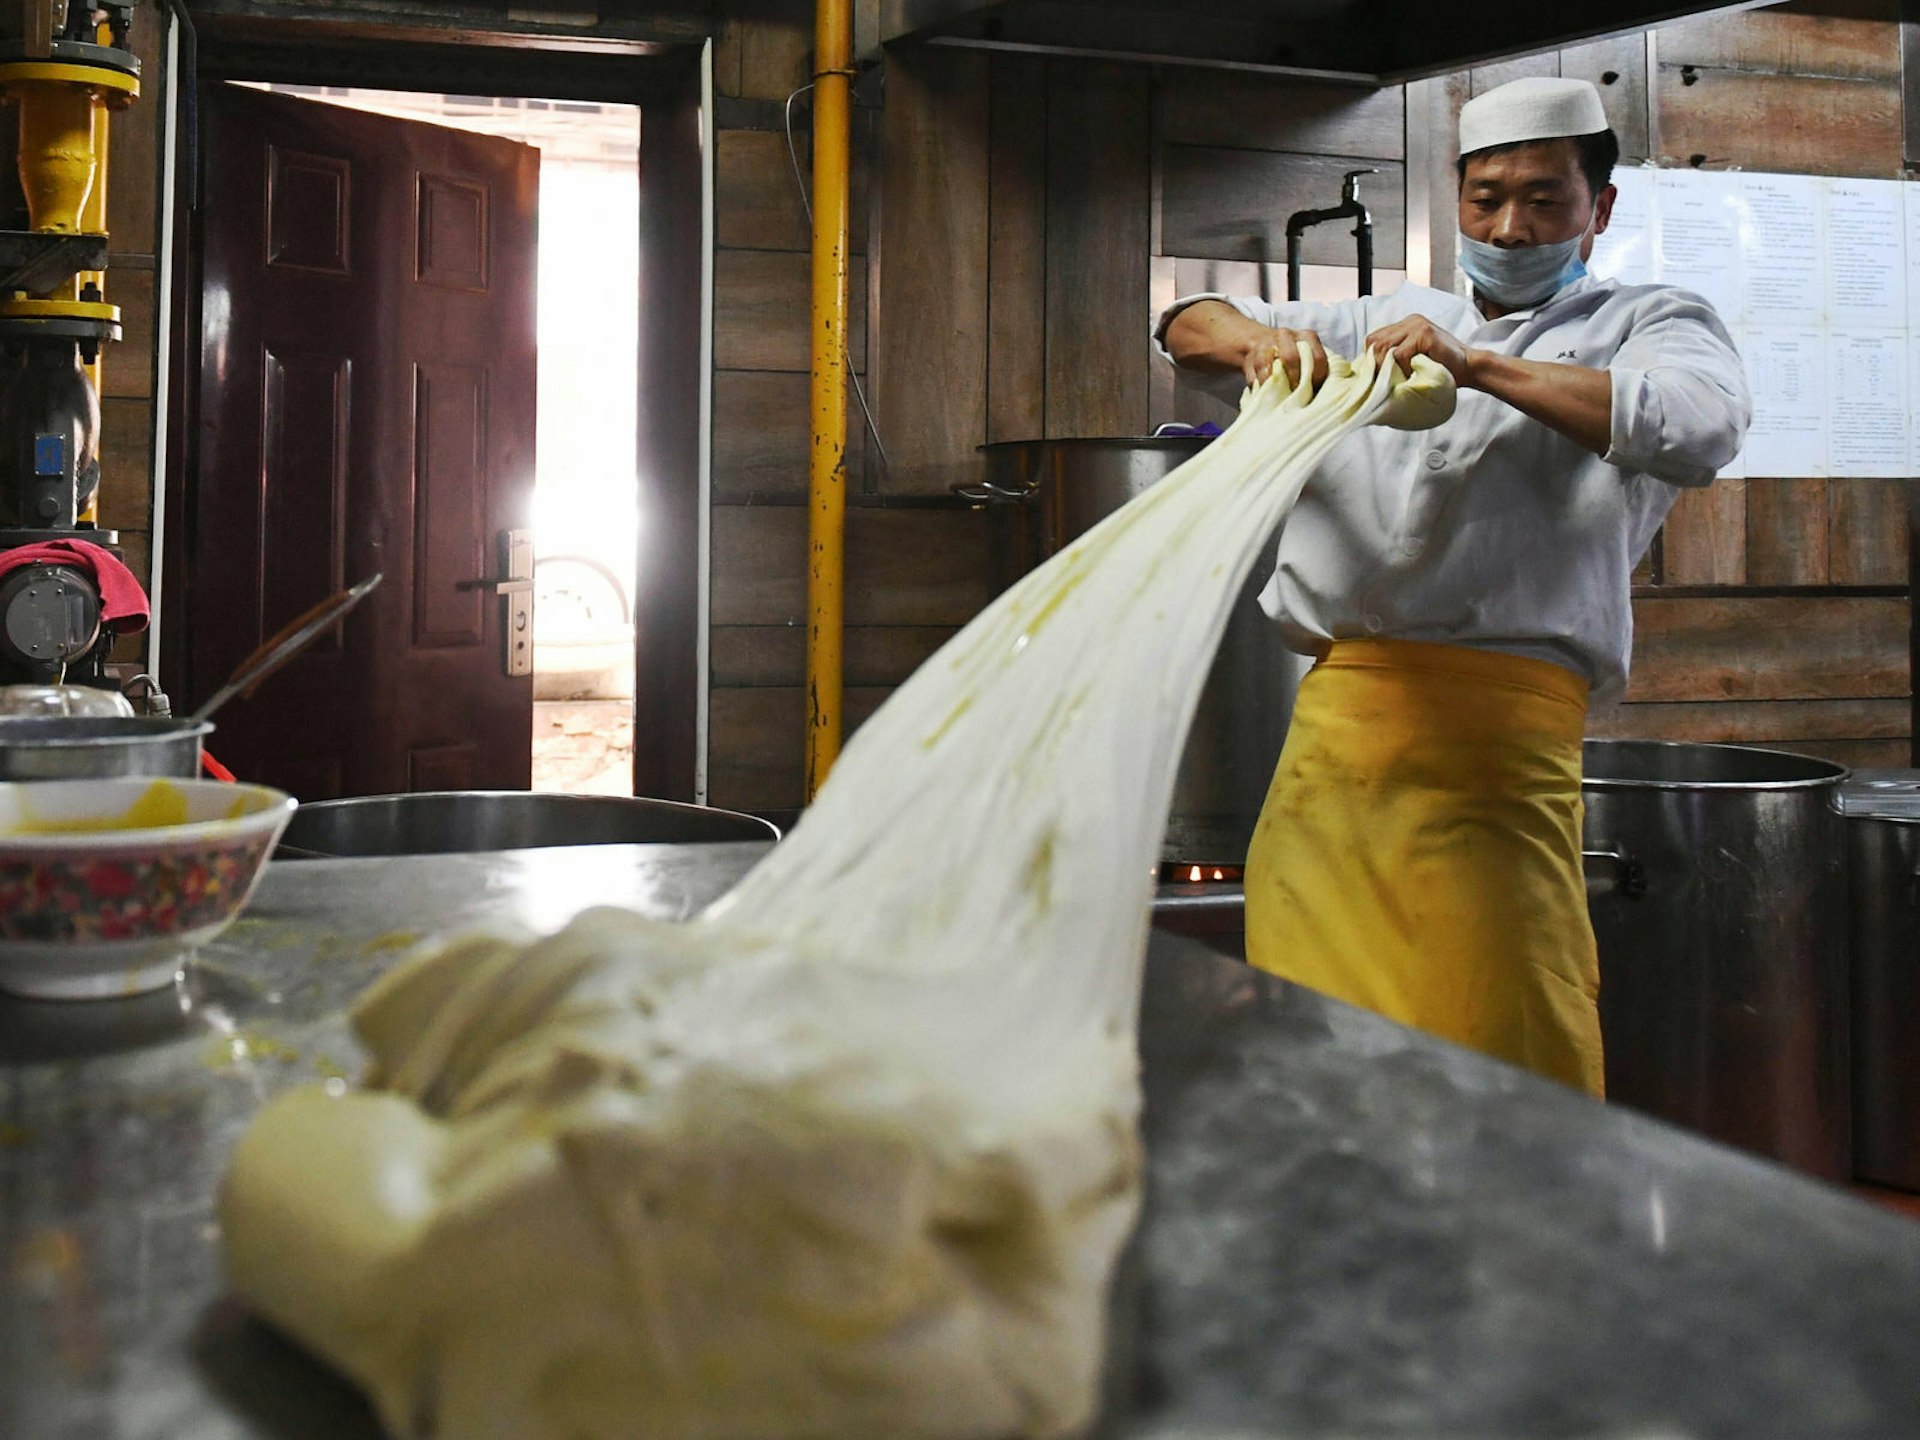 Stretching the dough for Lanzhou's famous lamian noodles © Xinhua News Agency / Getty